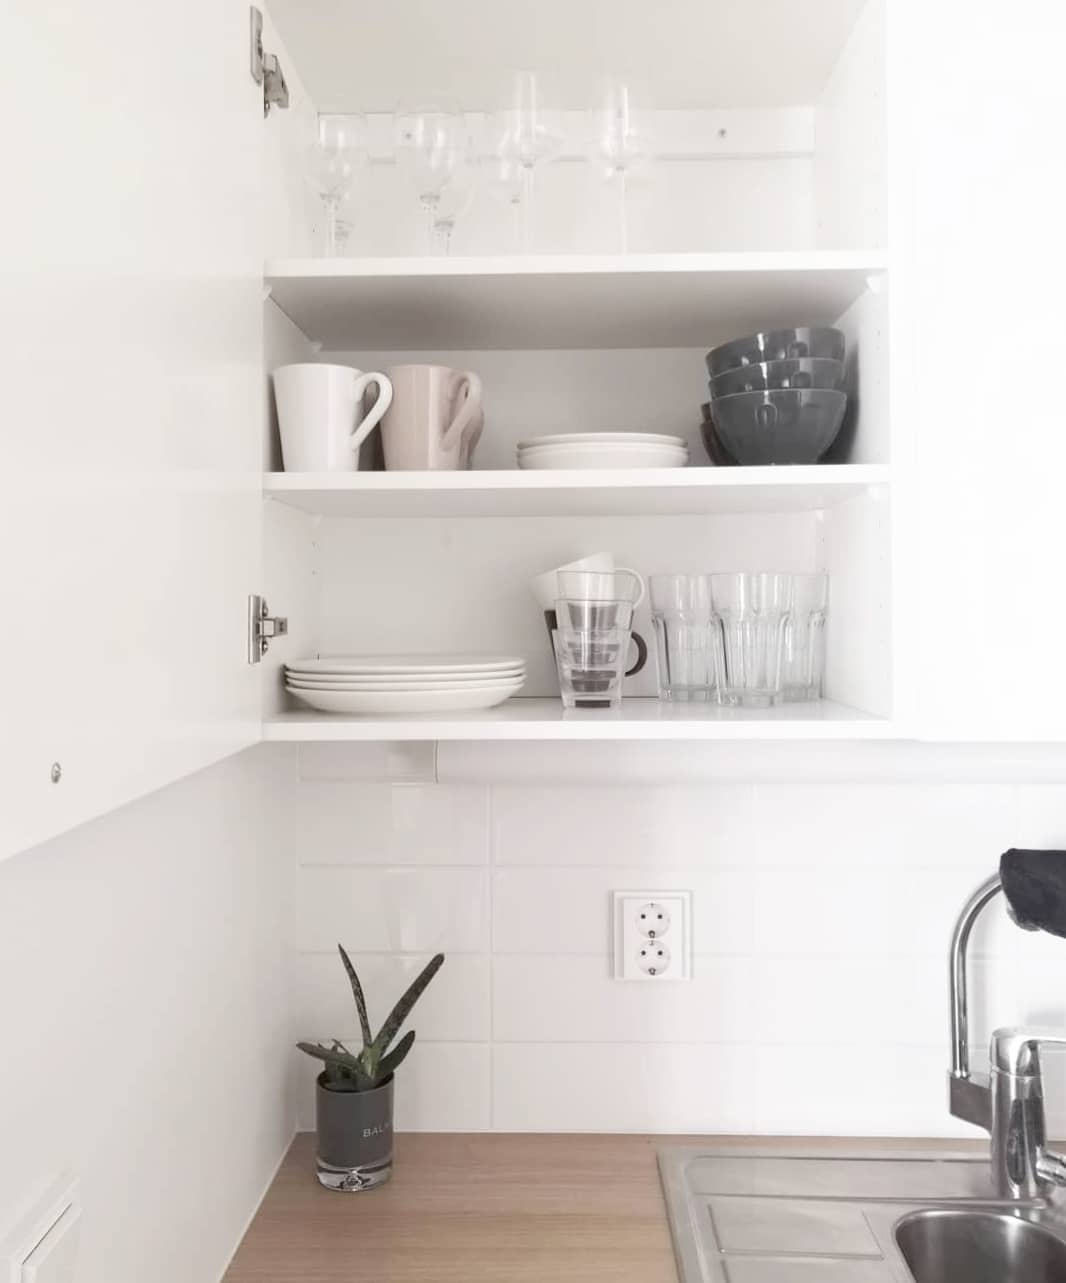 White kitchen with cabinet fulled or gray and white dishes. Photo by Instagram user @minimalismista